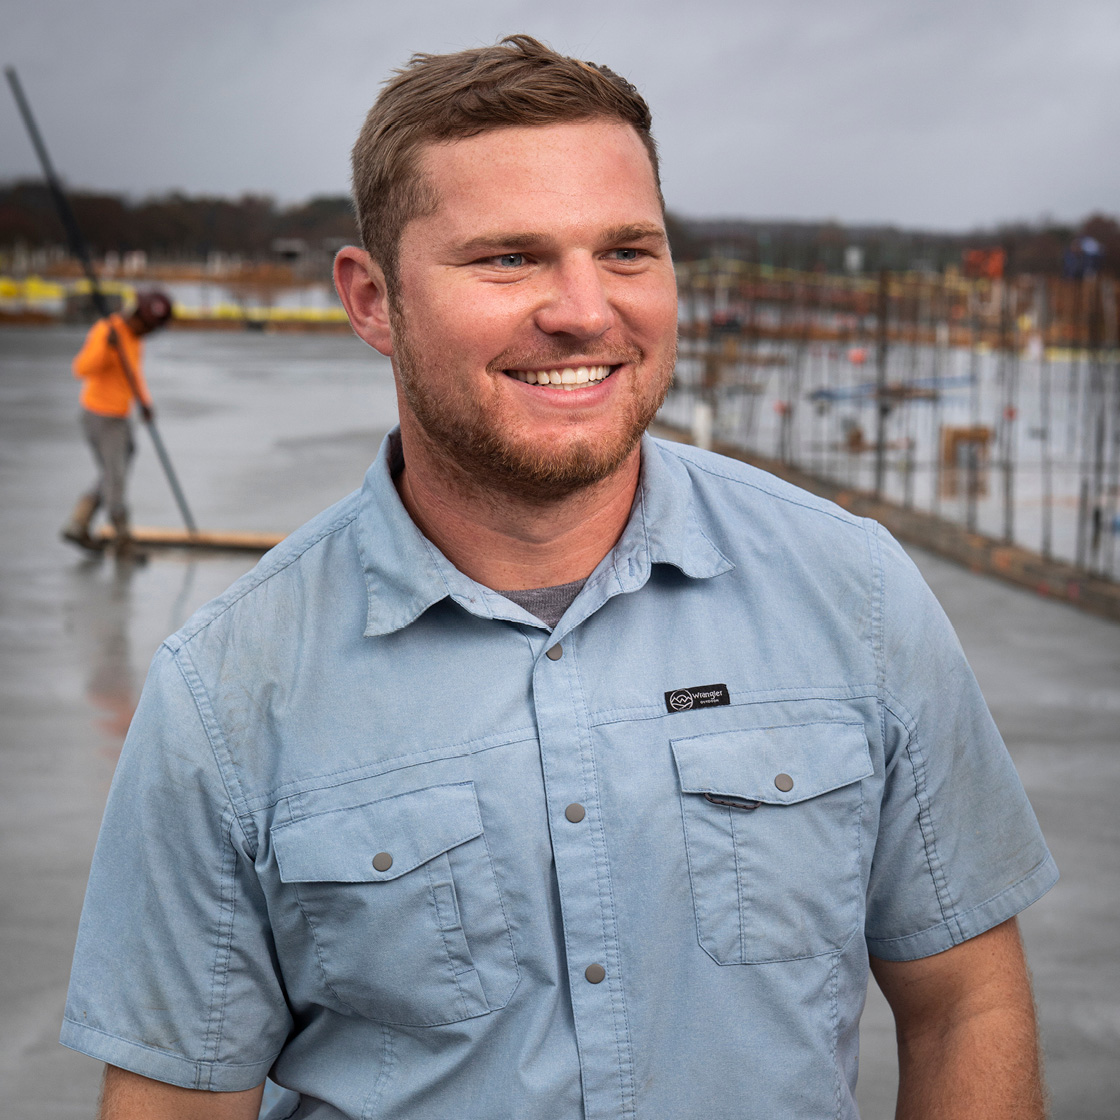 Professional outdoor portrait photo of man on construction site.